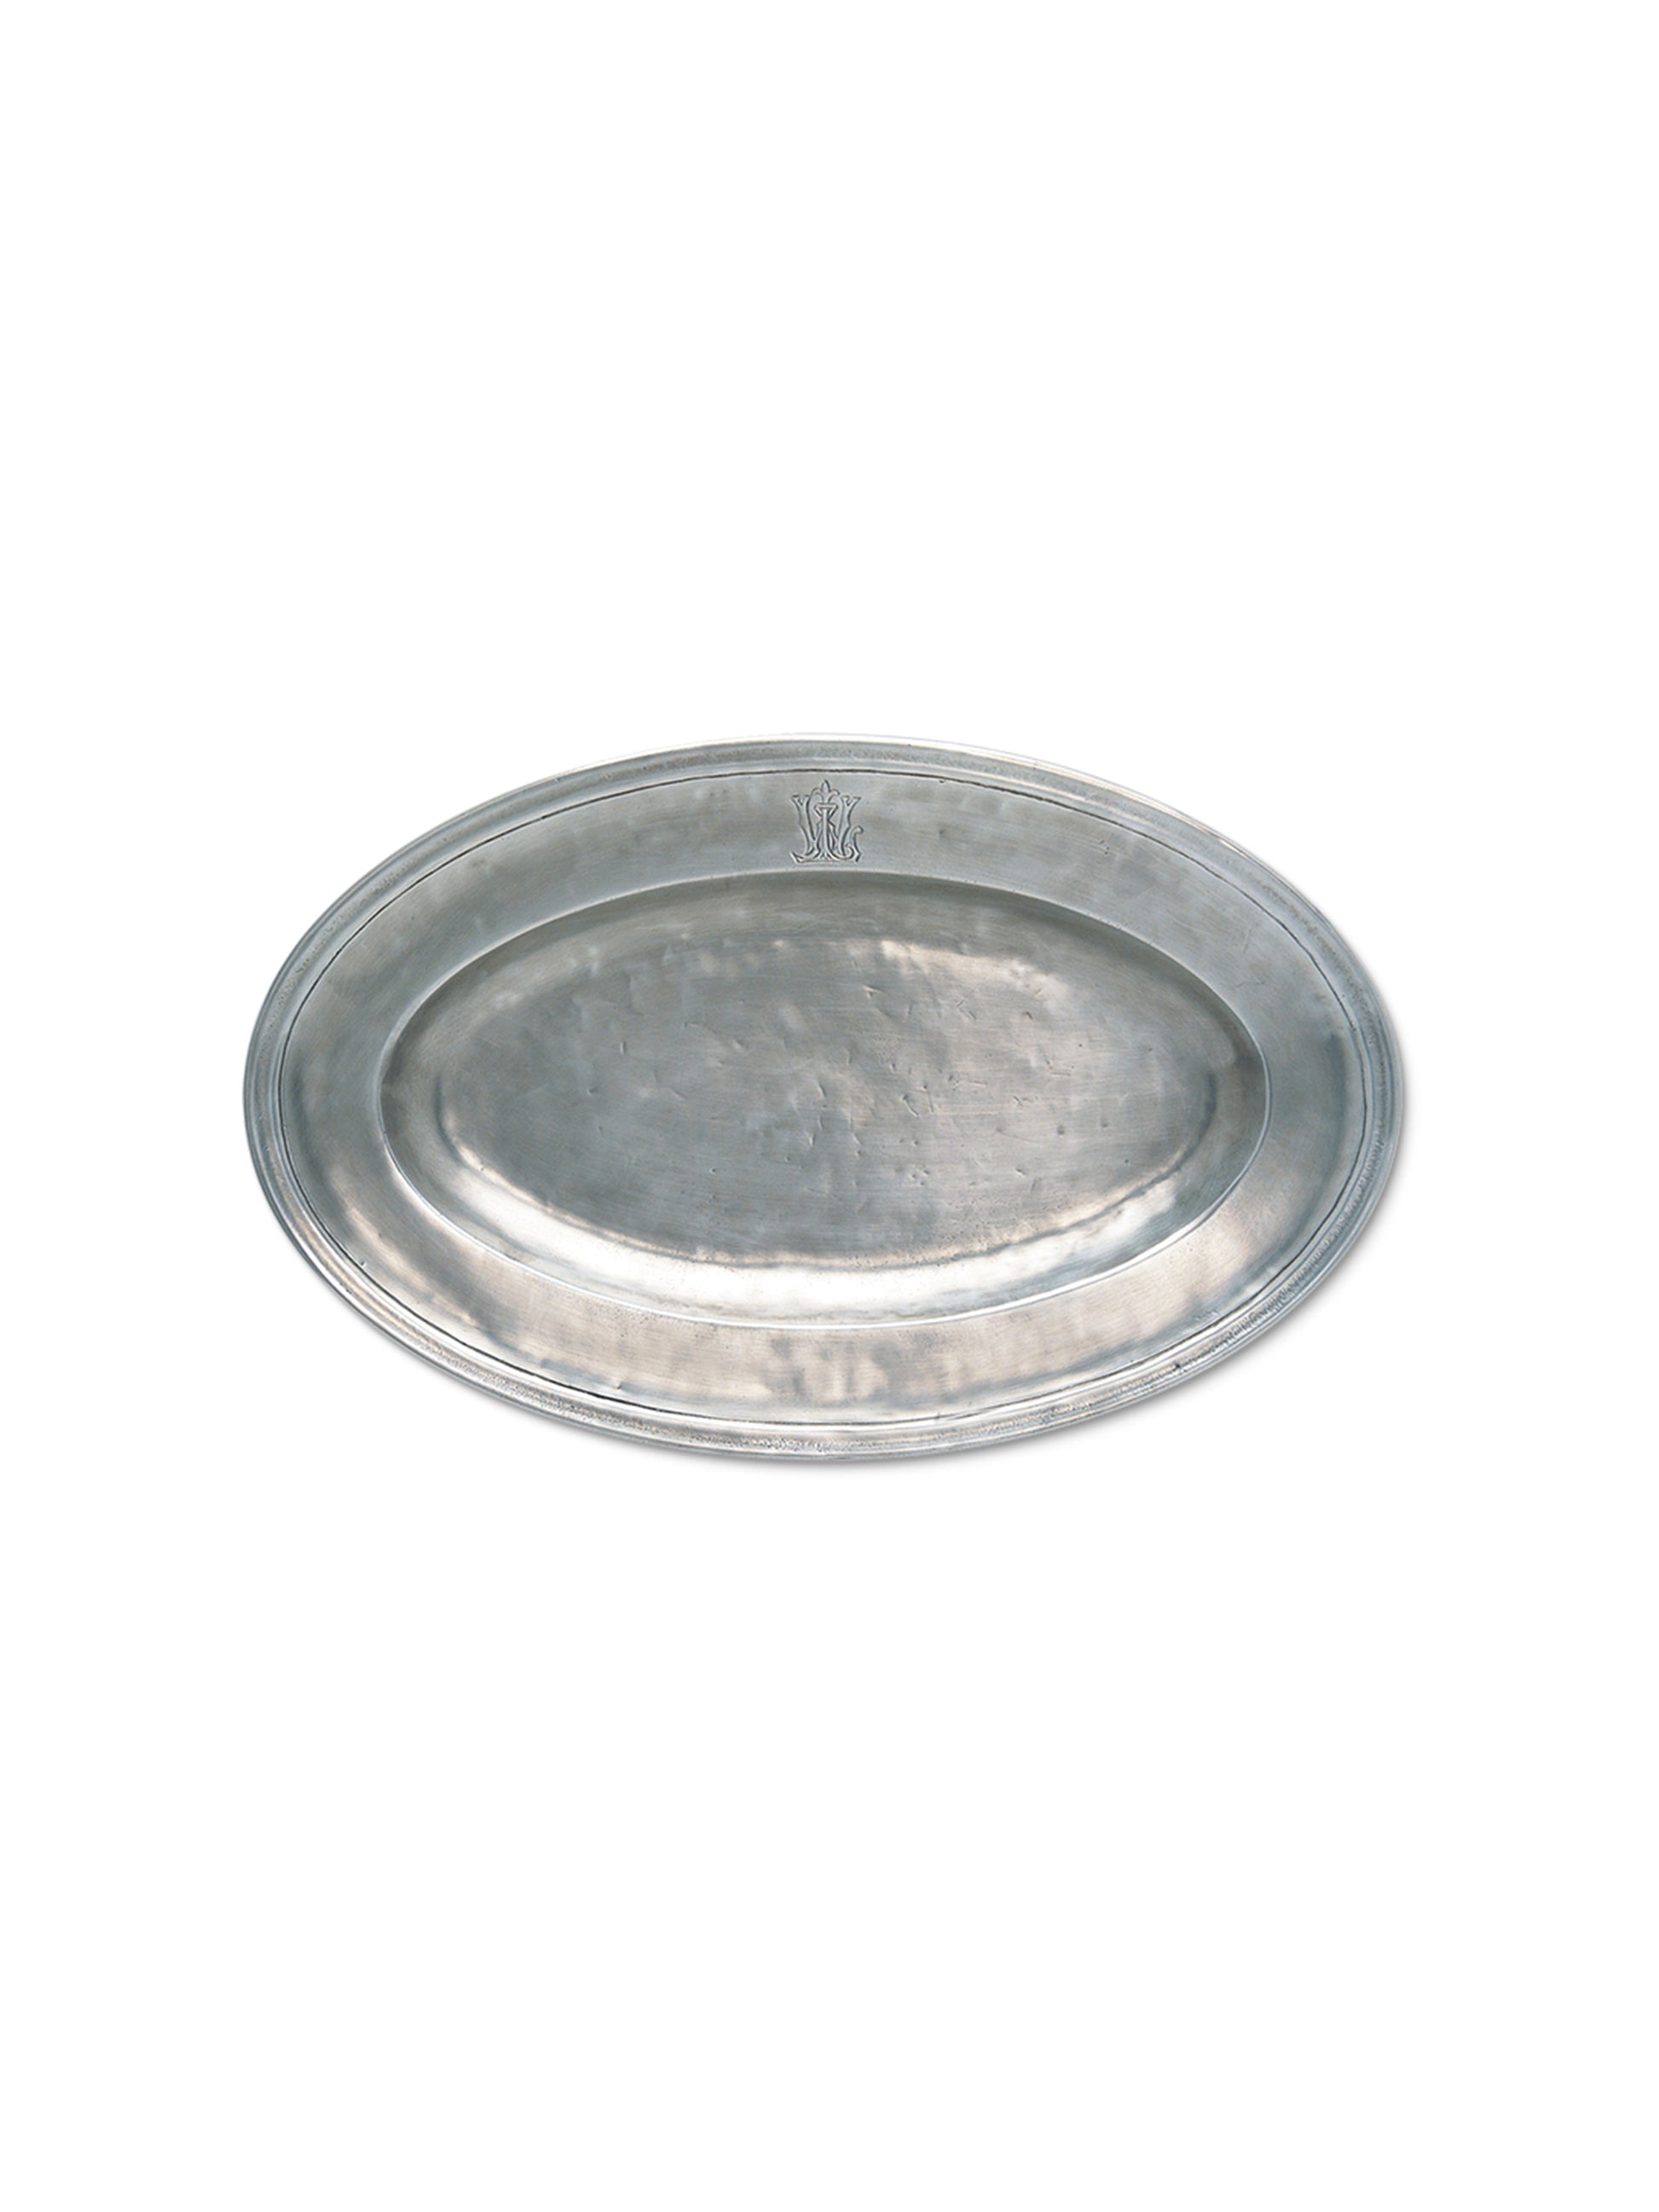 MATCH Pewter Oval Platter WL Weston Table